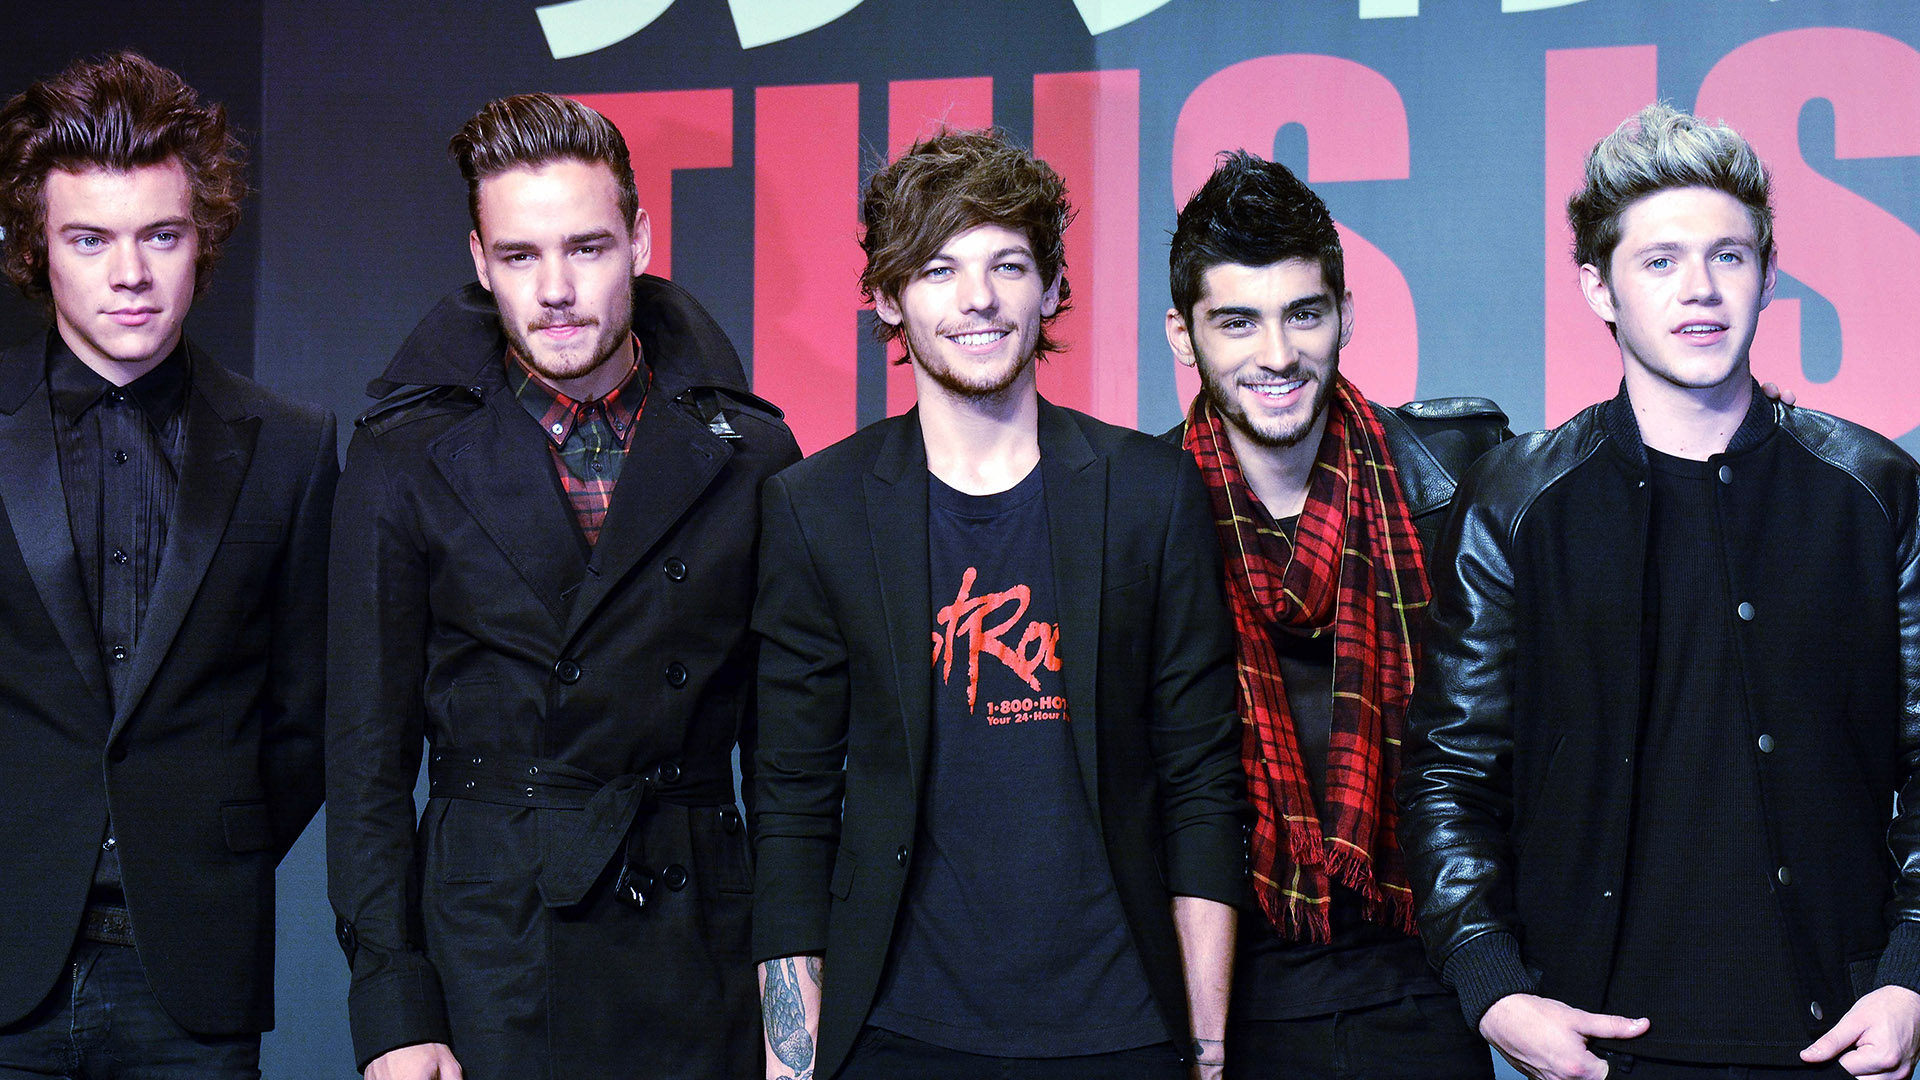 In 7 Years After One Direction Broke Up, One Member's Career Never Really Took Off